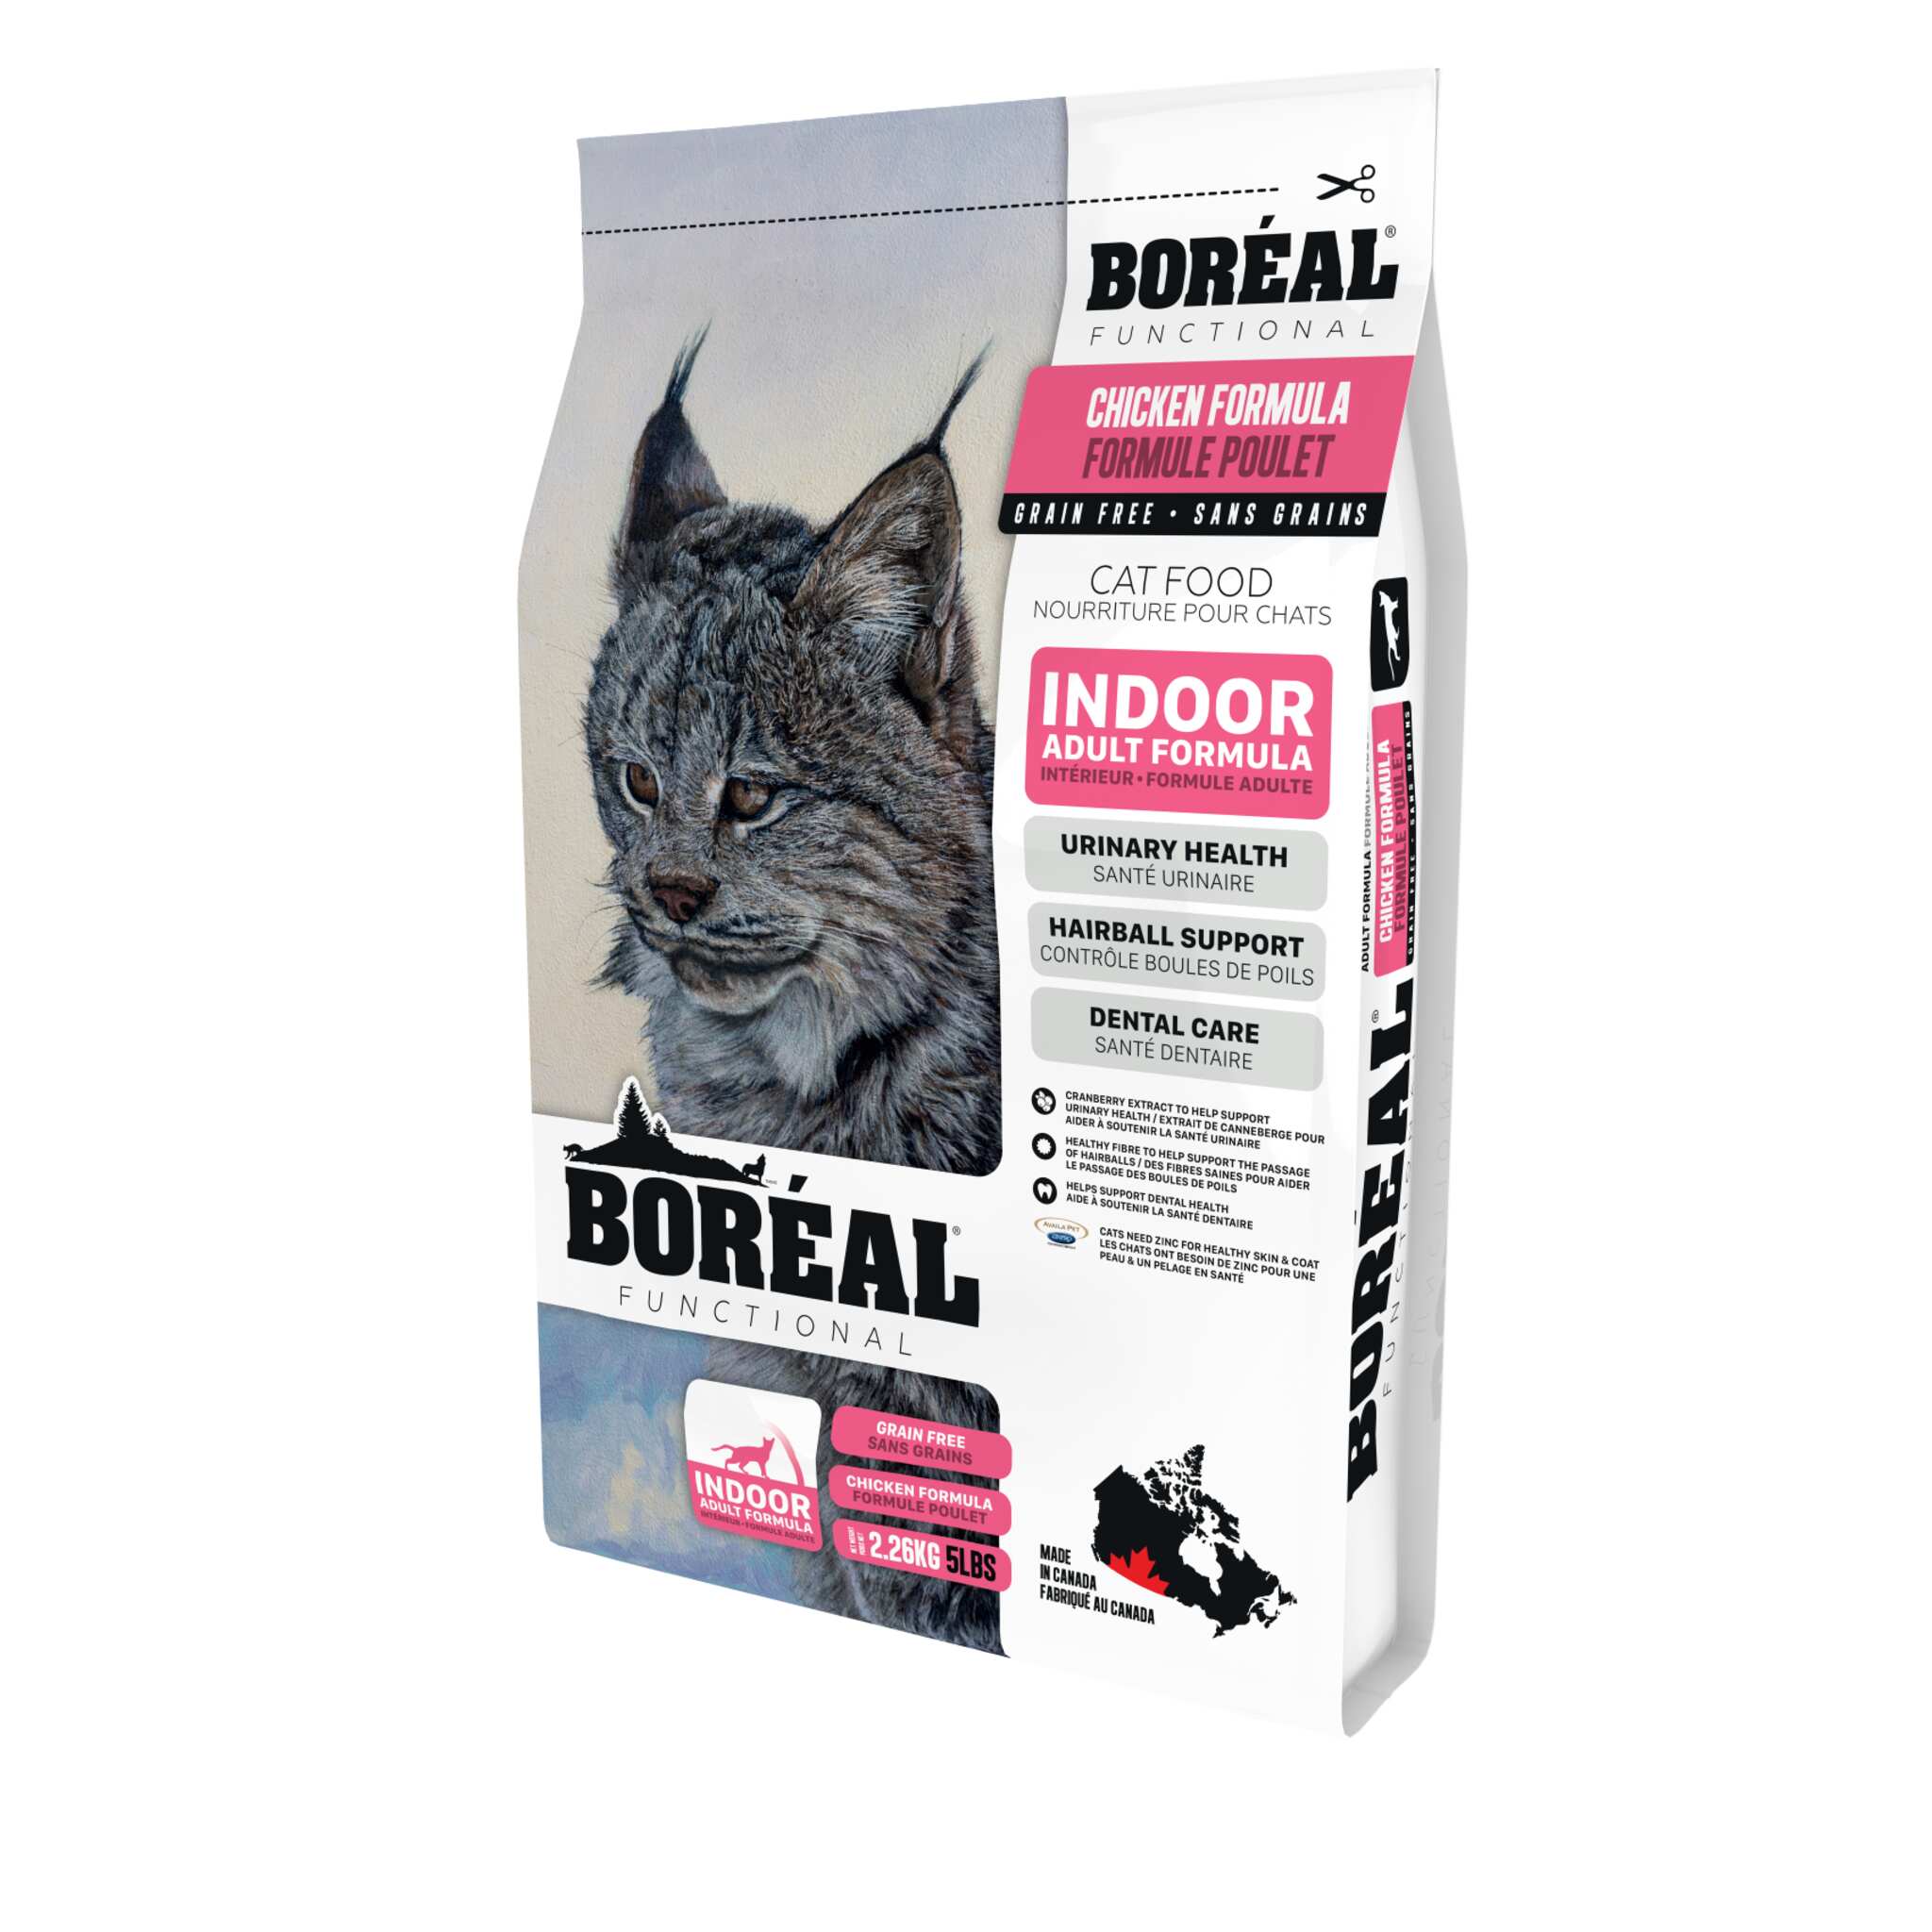 Boreal dry Cat Food, Indoor Adult recipe for urinary health, hairball & dental support, grain-free, 5 lb.